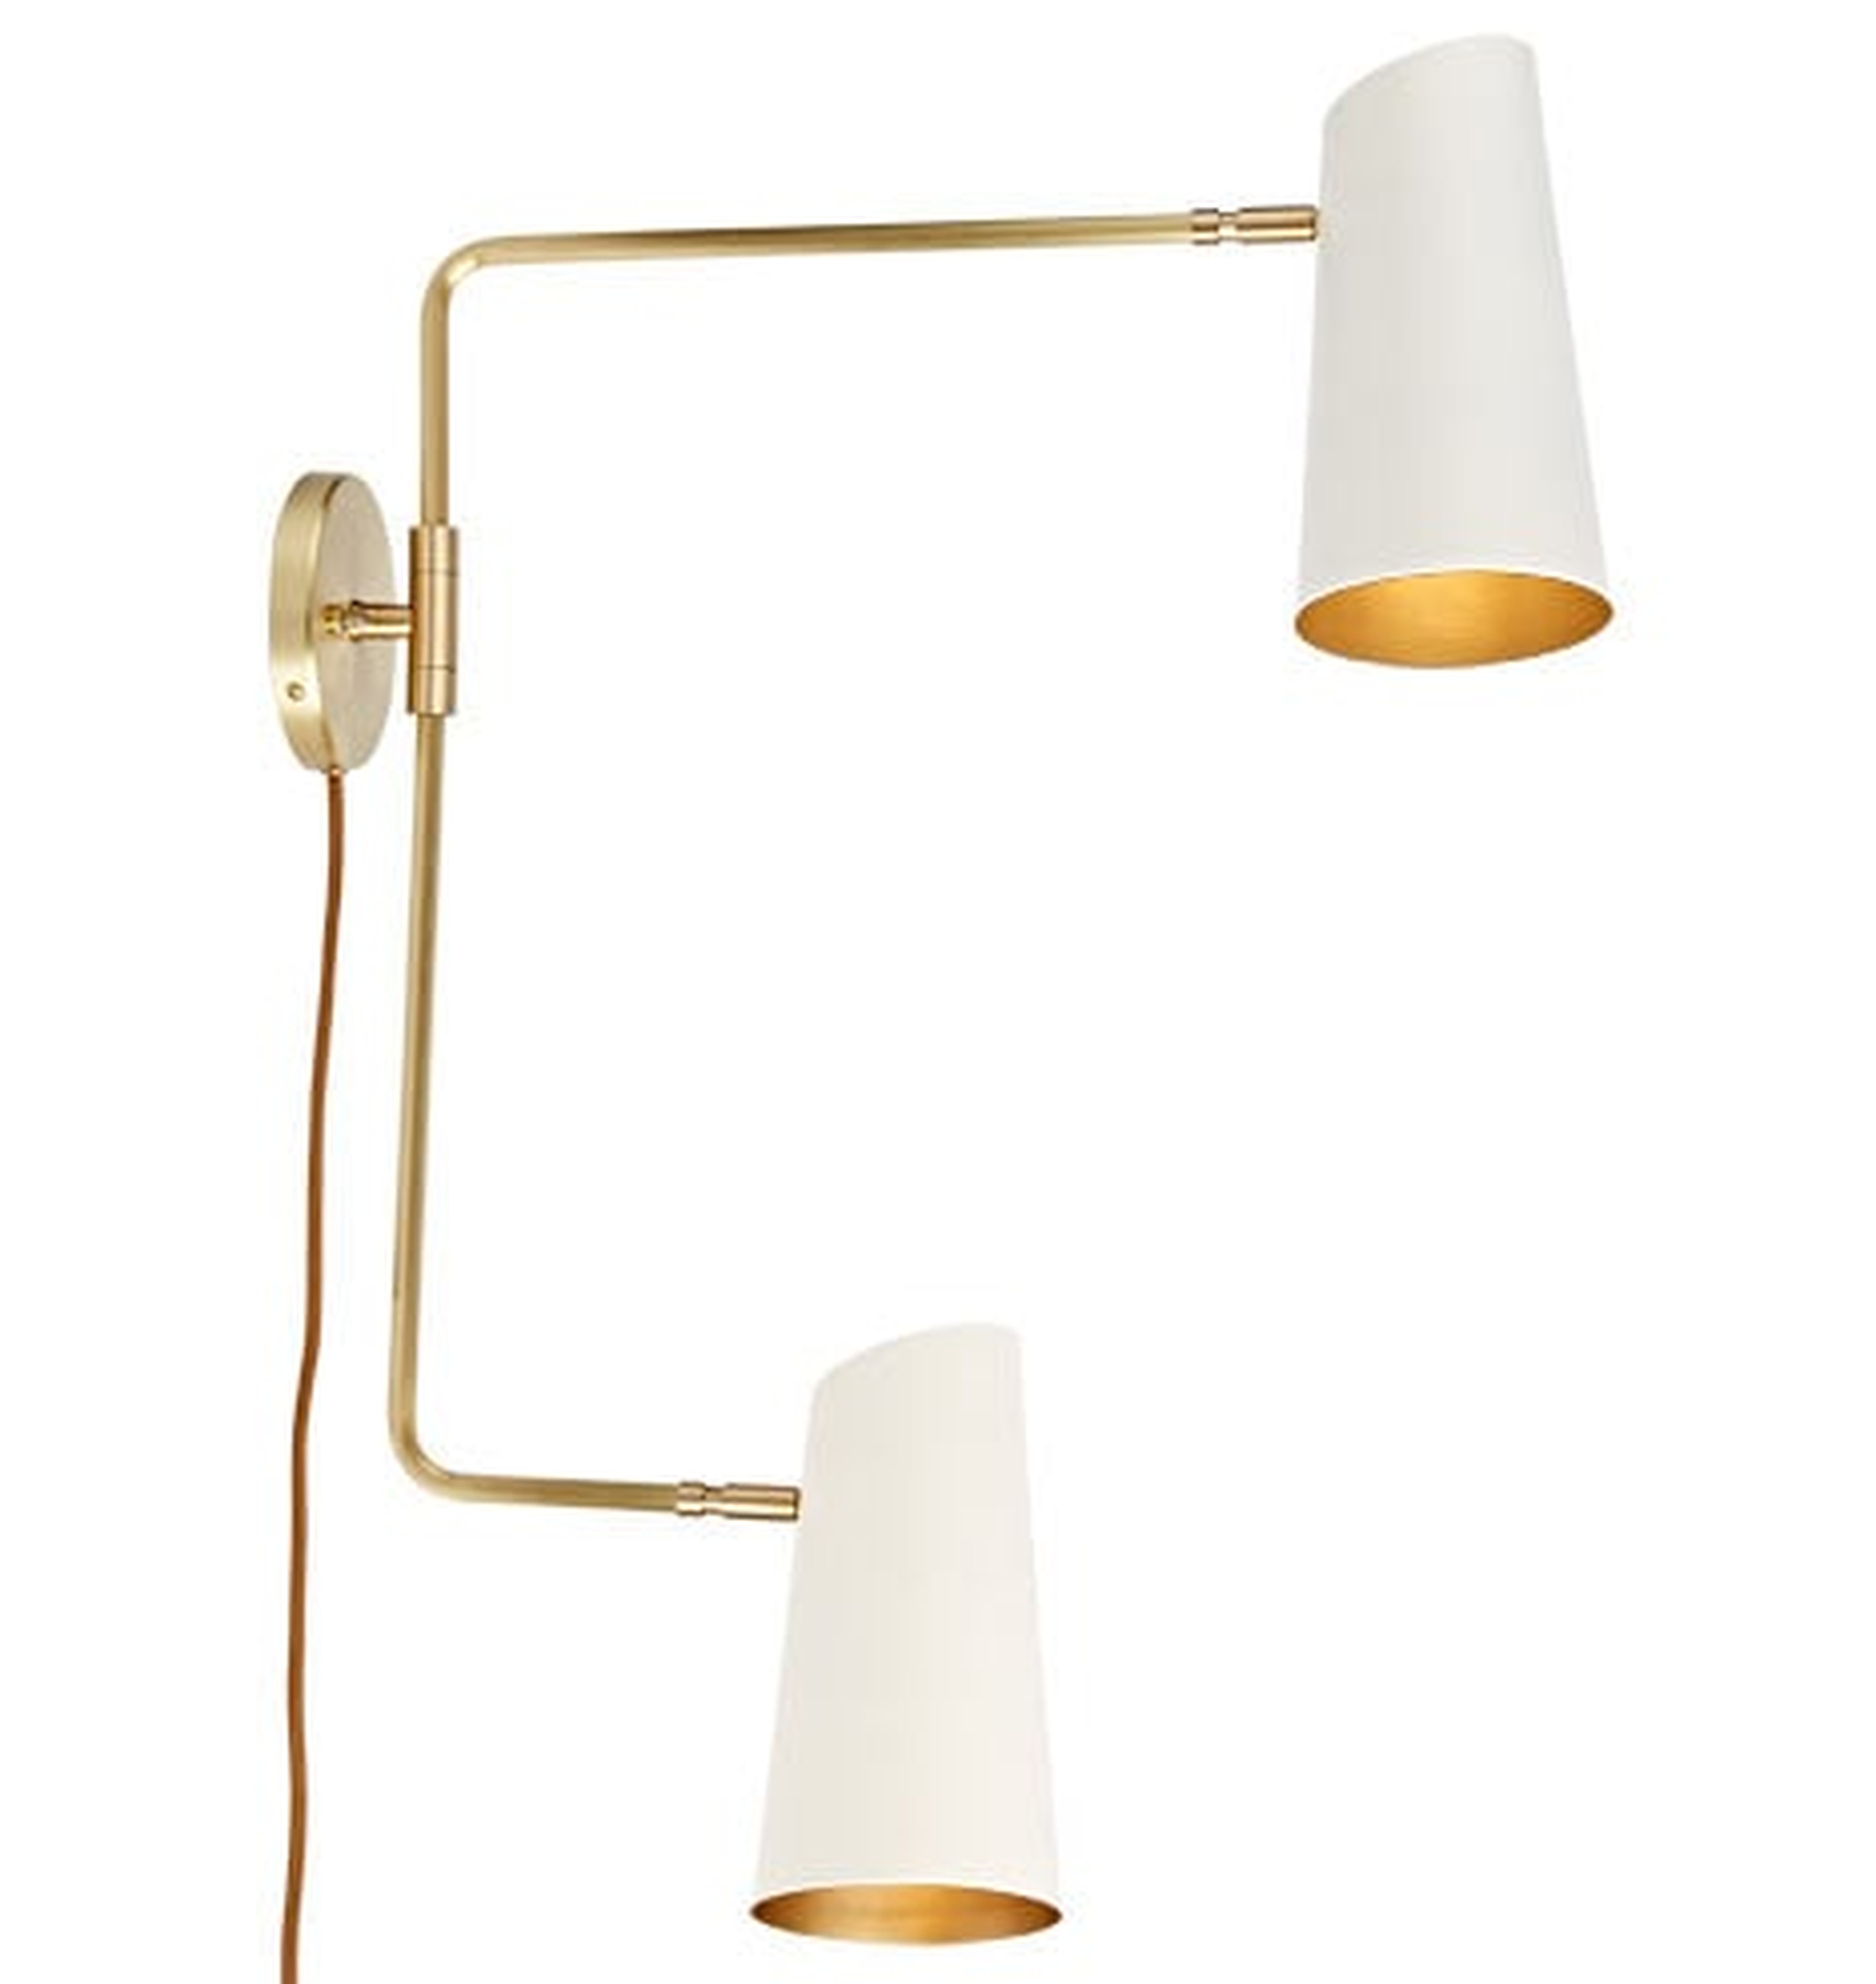 Cypress Double Swing Arm Sconce Plug-In - Rejuvenation